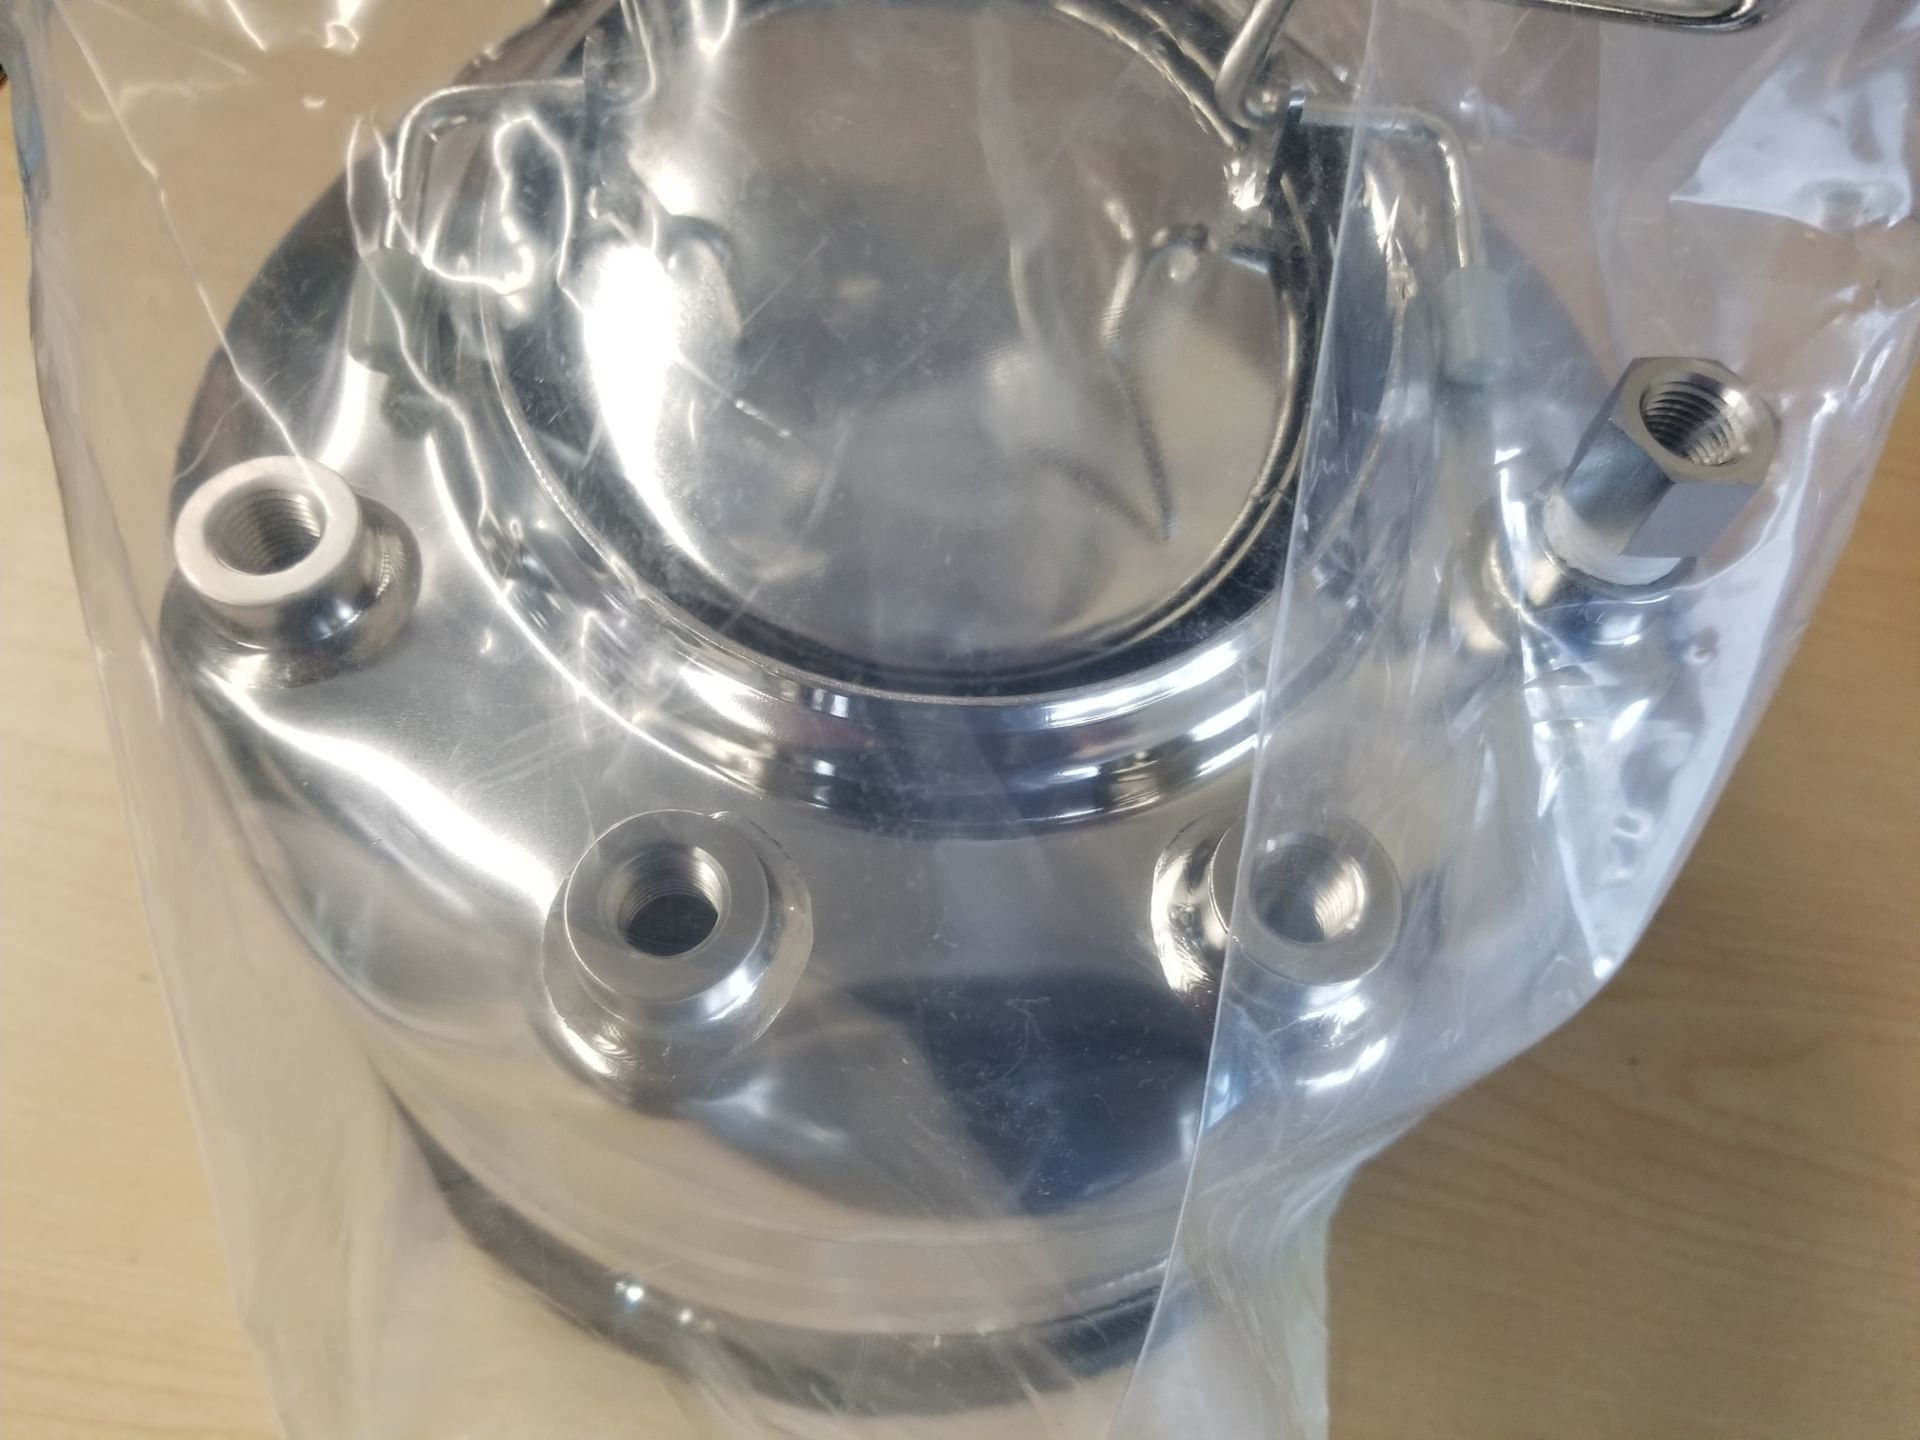 New Alloy Products 316L Stainless Steel Pressure Vessel - Image 4 of 12